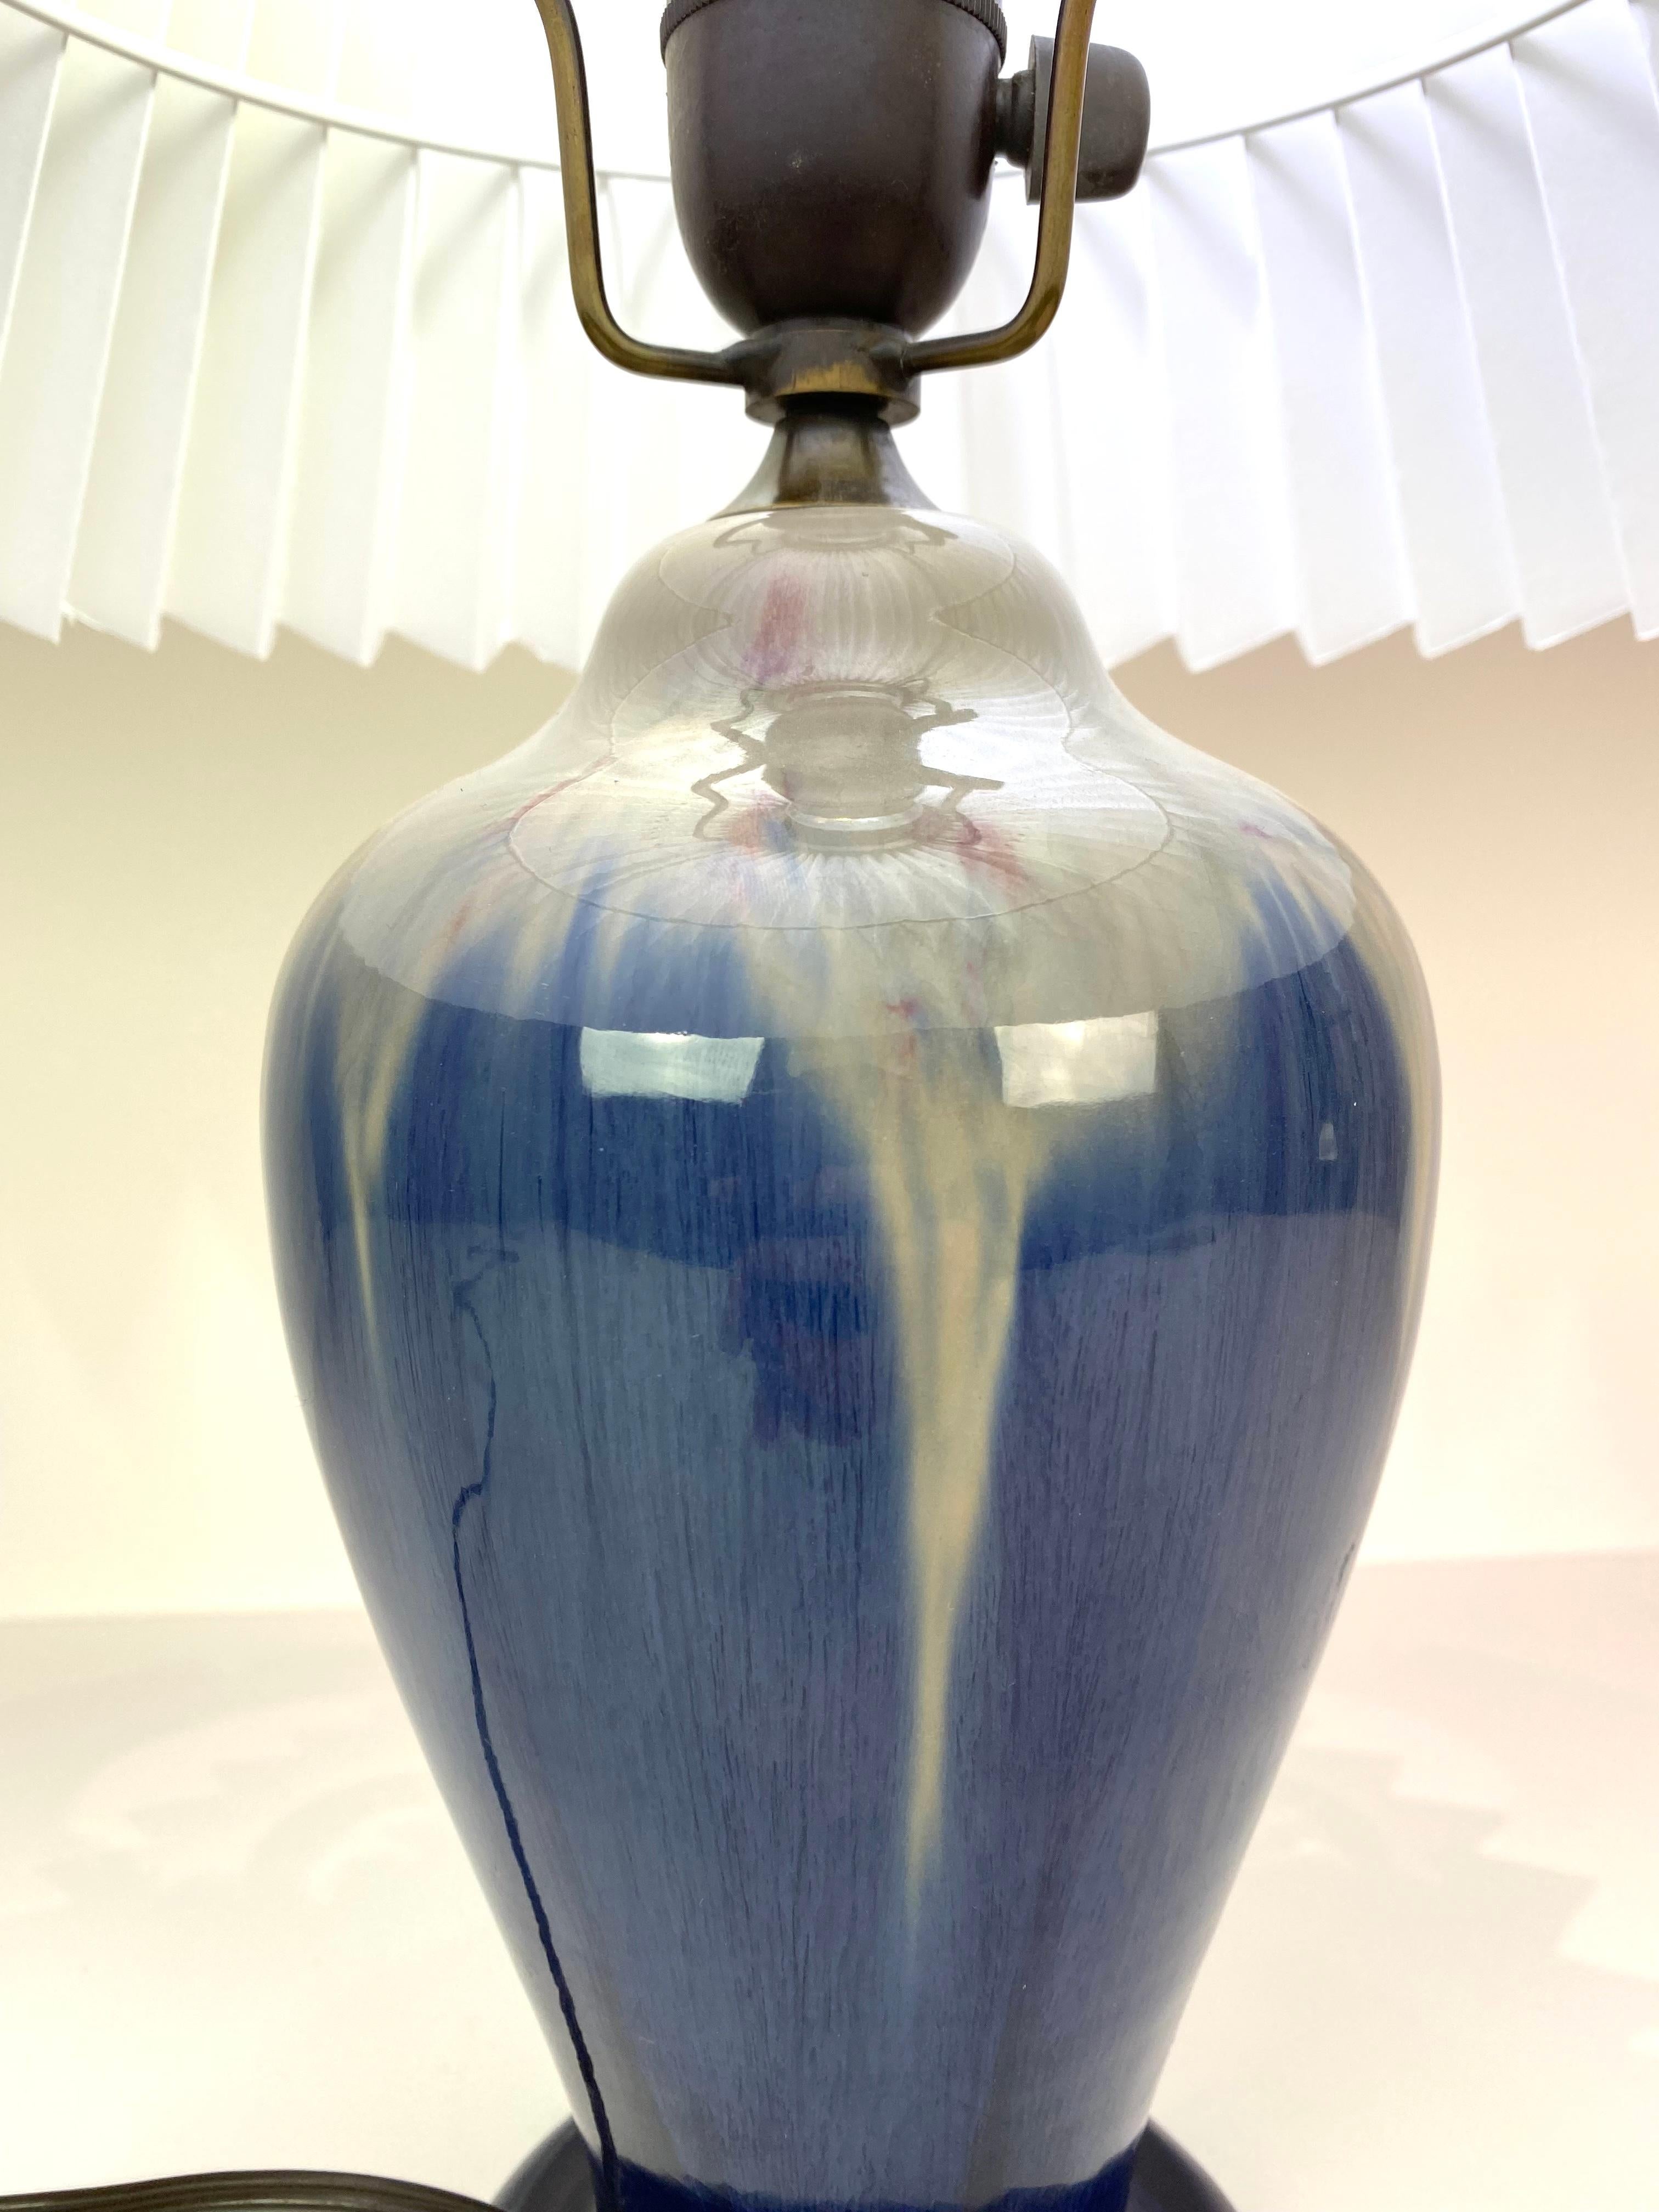 Danish Ceramic Table Lamp with Blue Glaze and Paper Shade, by Michael Andersen